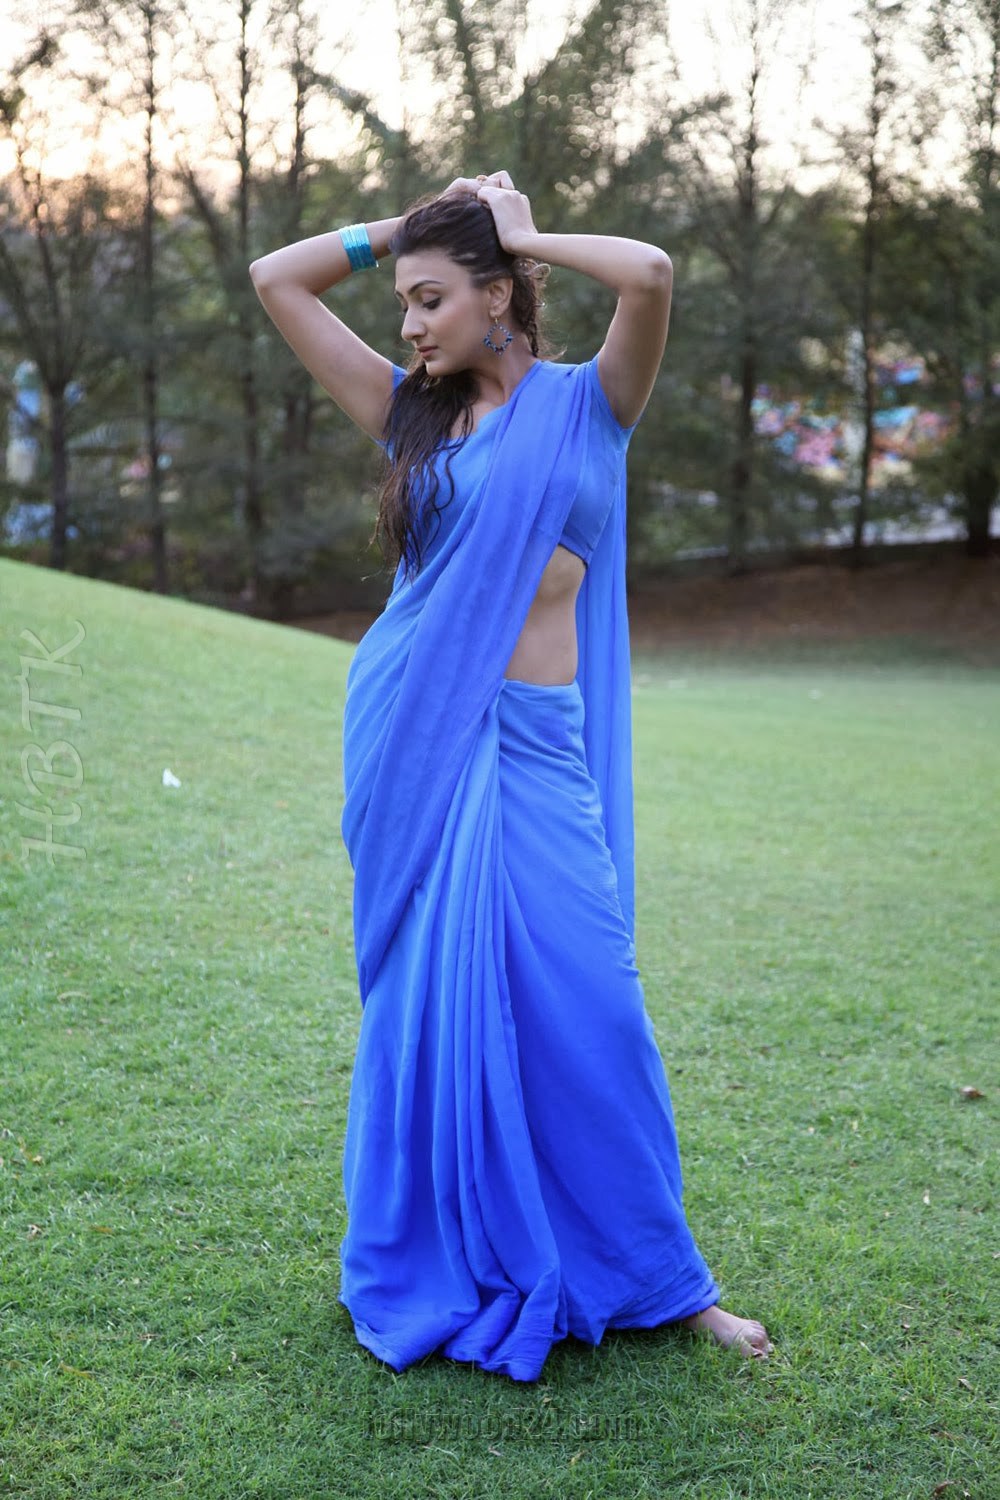 HBTKOllywood: Neelam Upadhyay in Blue saree and she is getting wet in ...